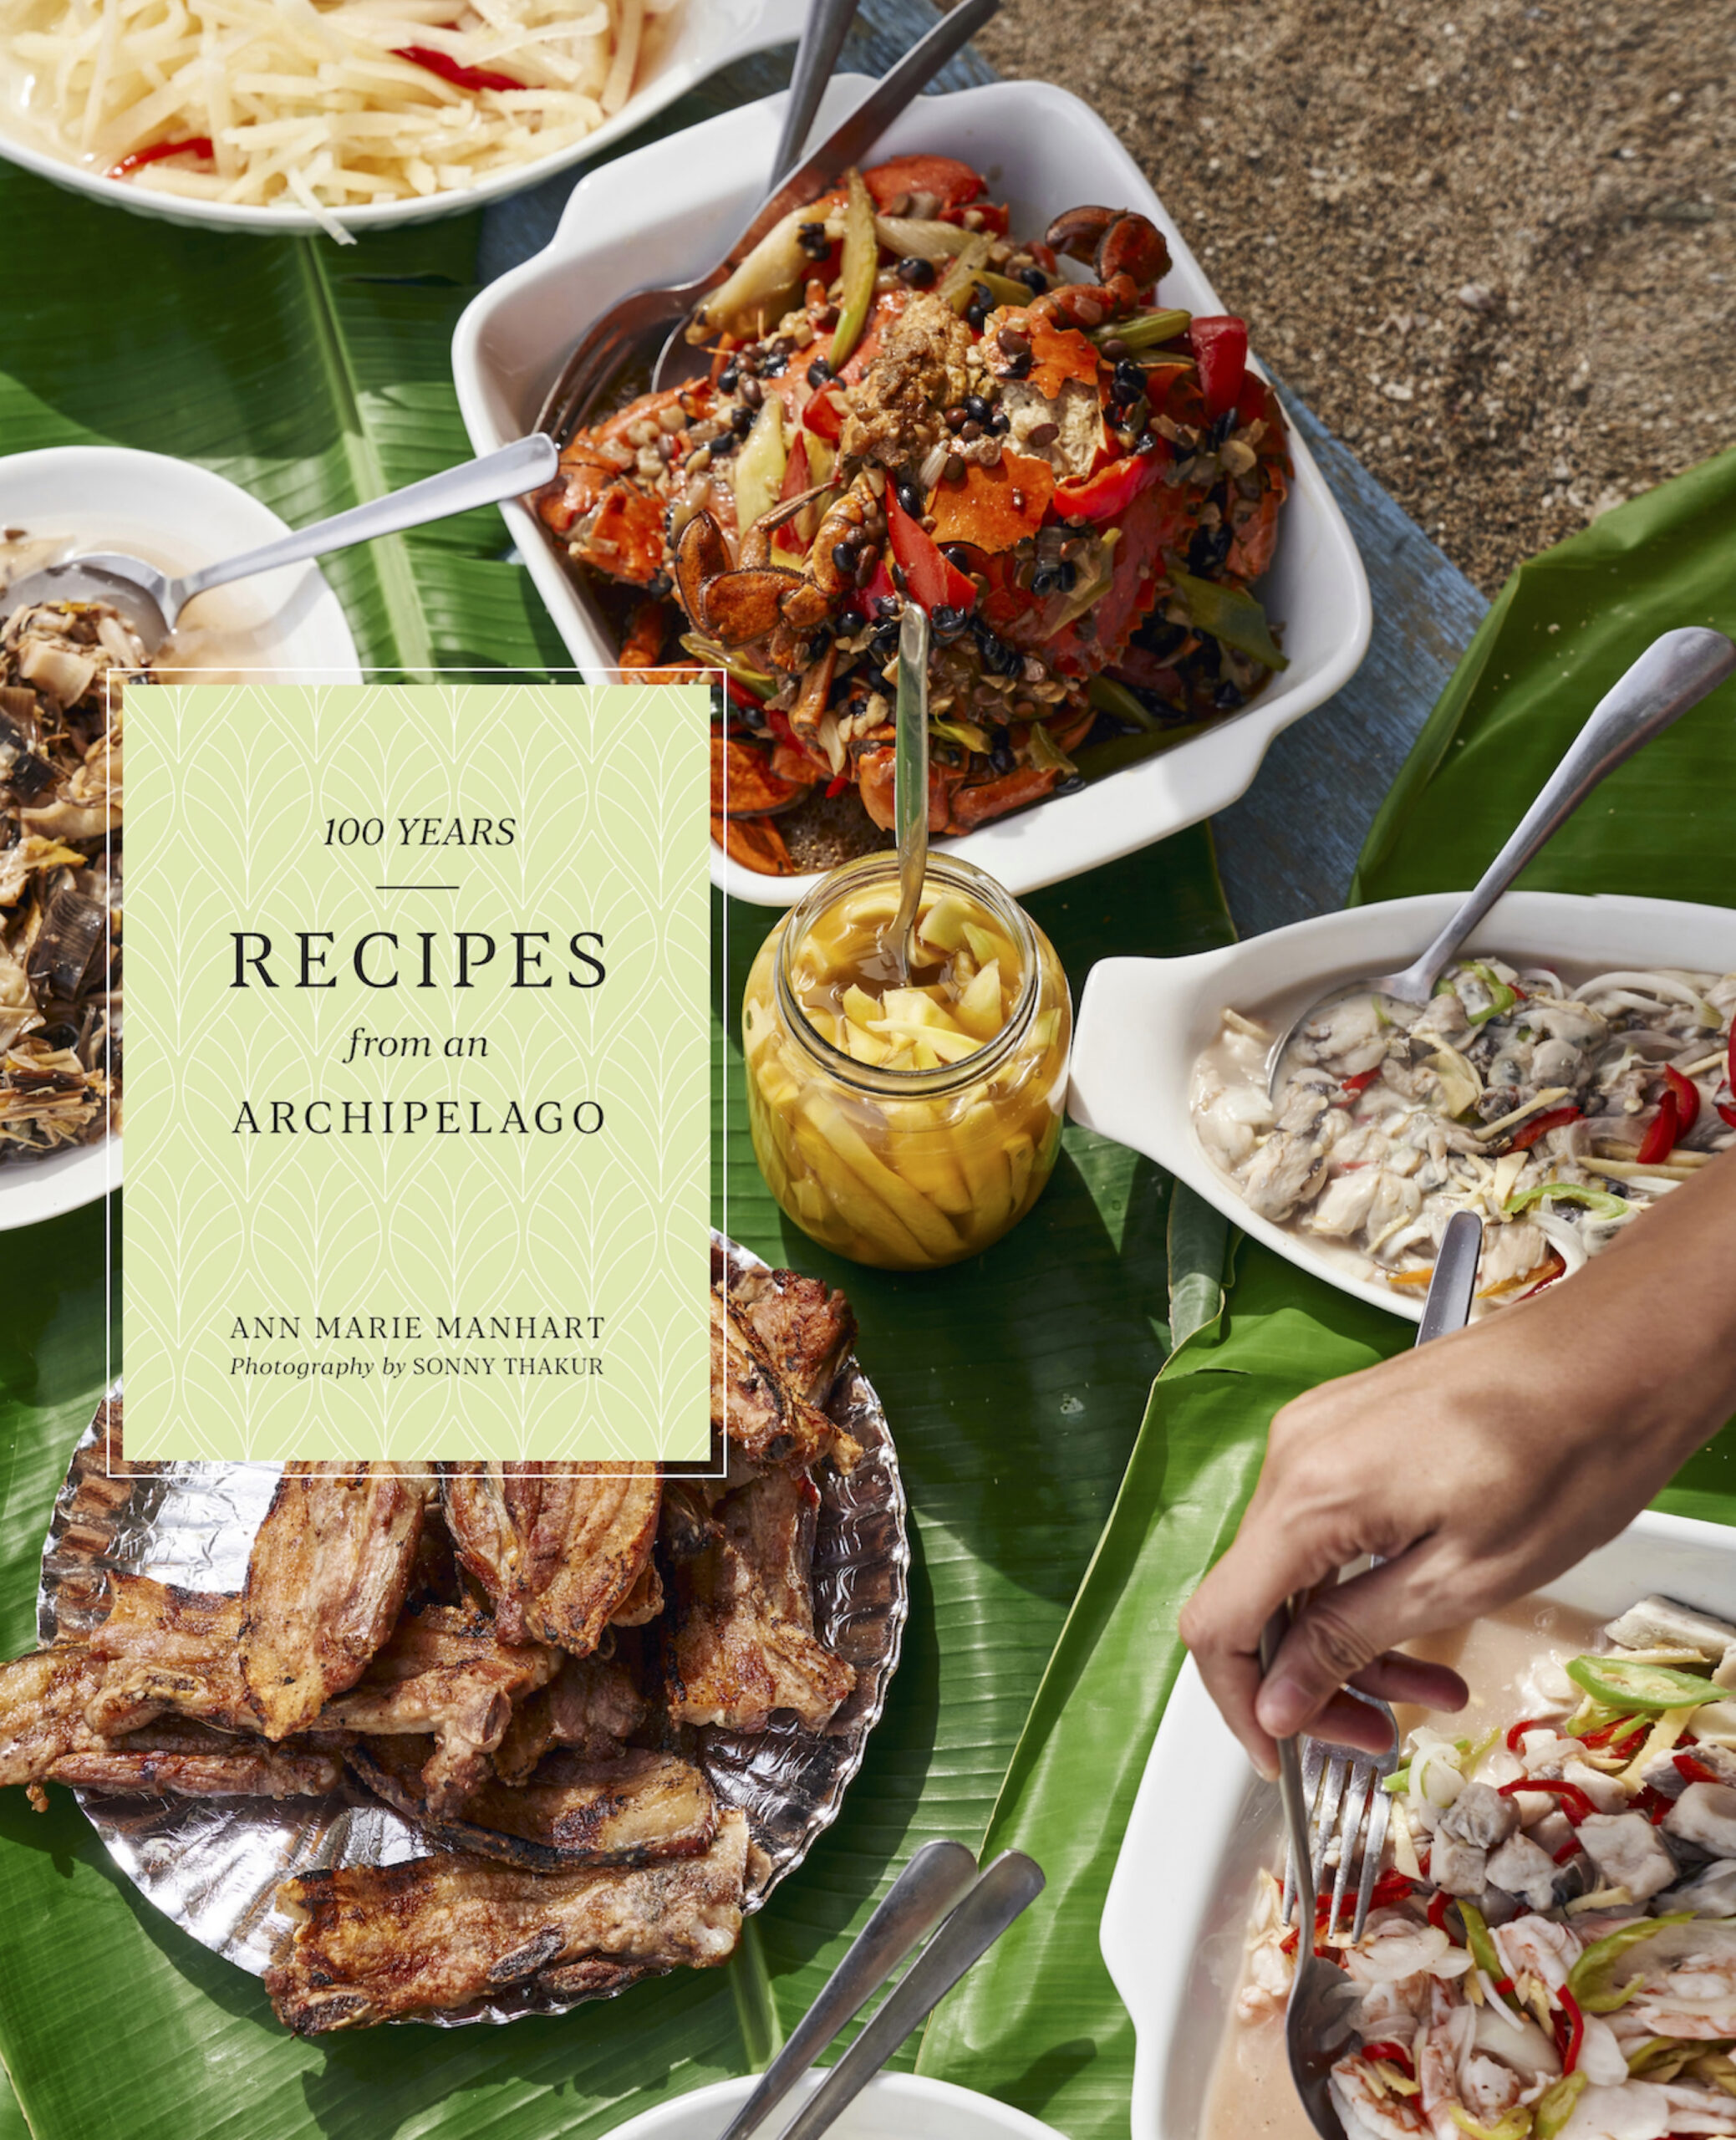 100 Years: Recipes from an Archipelago